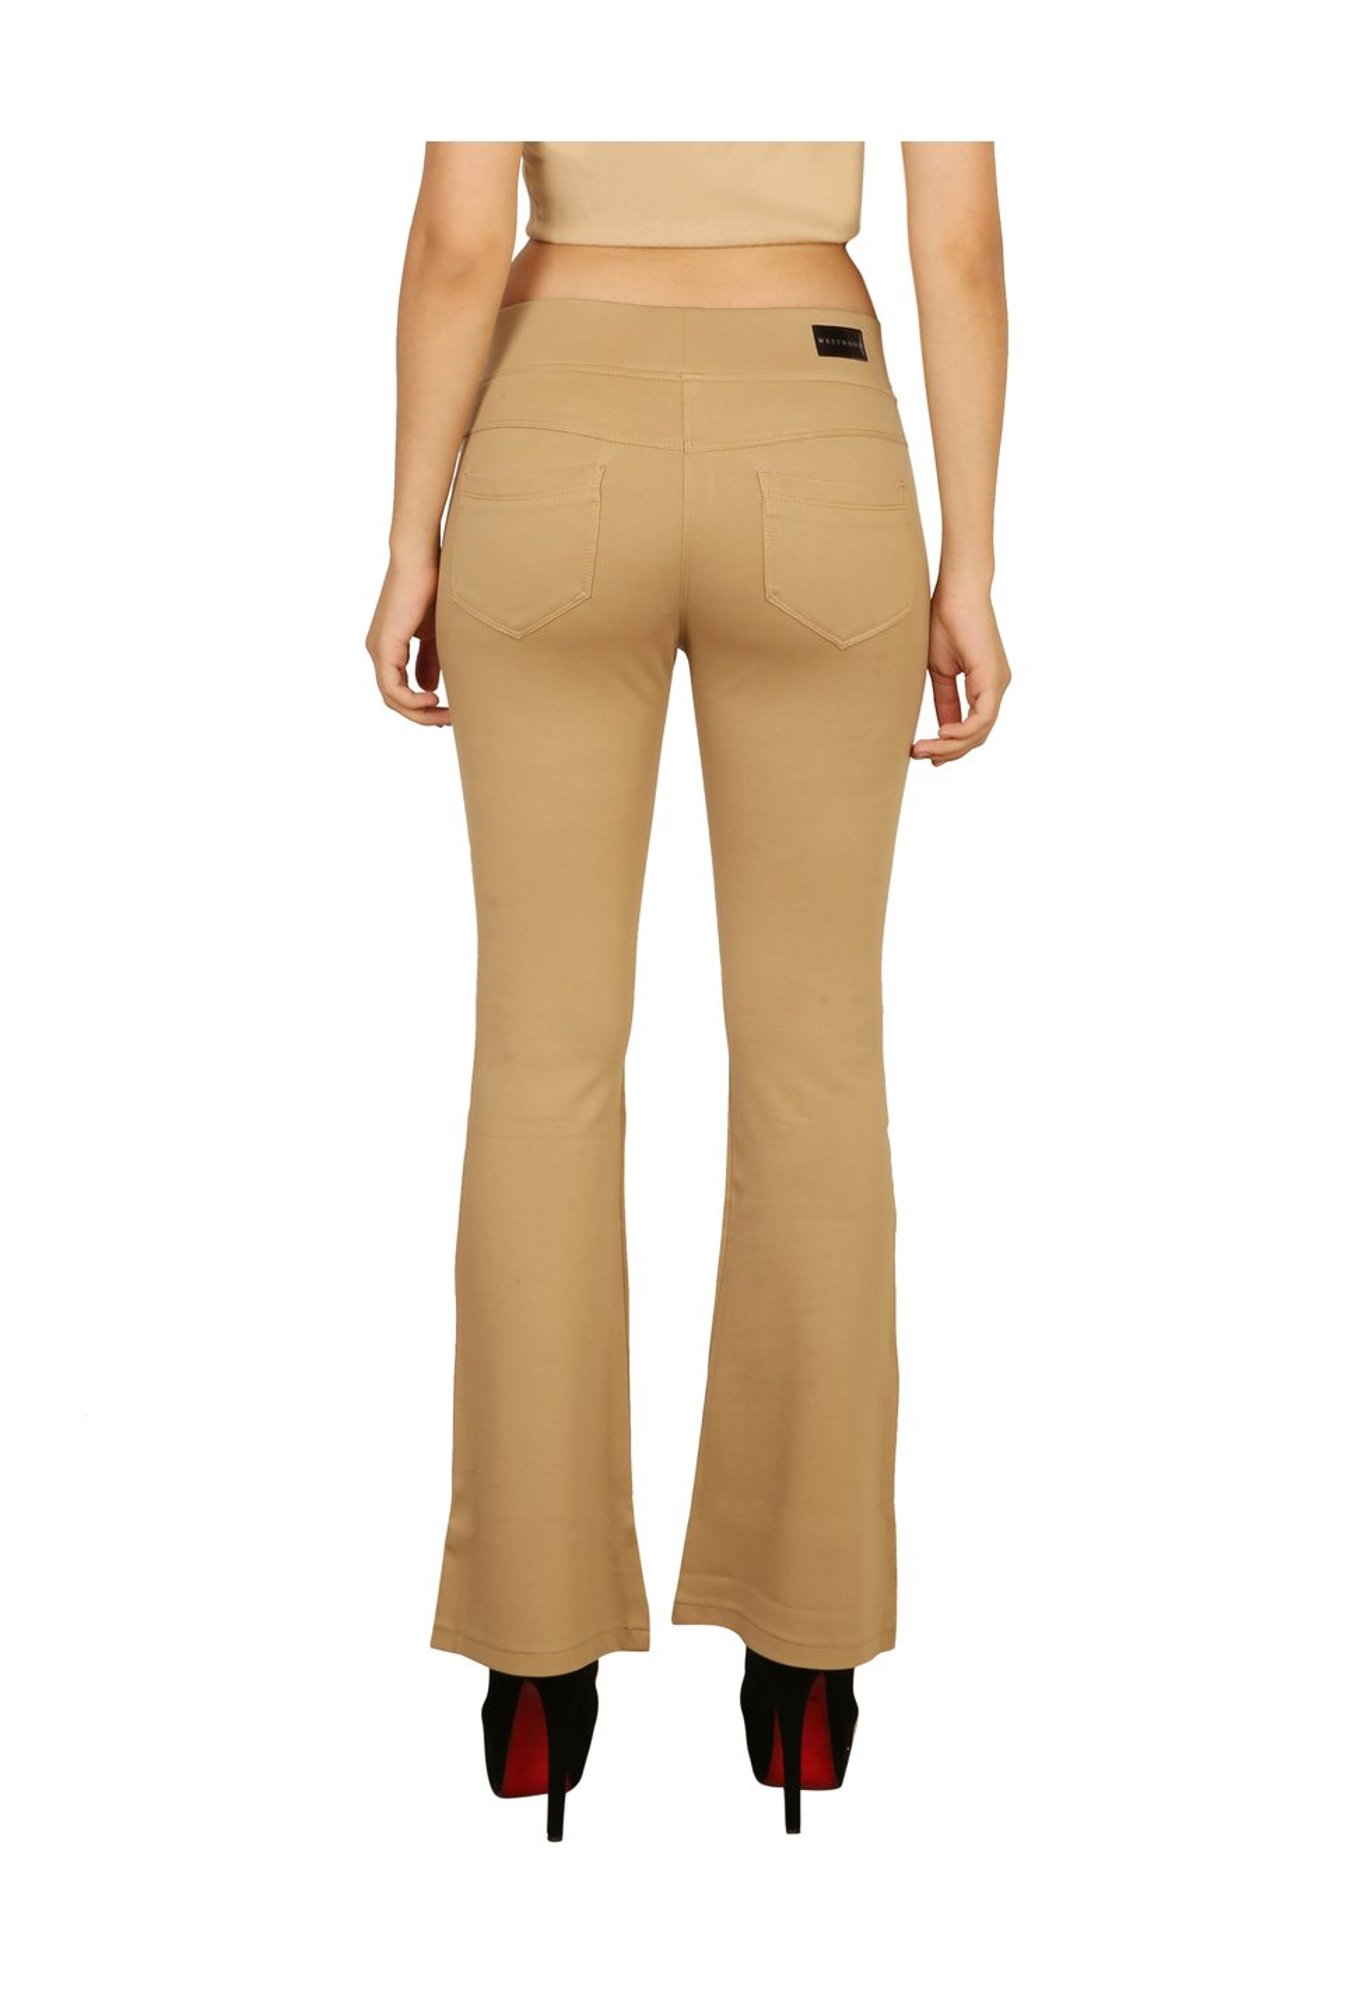 Buy Westwood Beige Mid Rise Trousers for Women Online @ Tata CLiQ